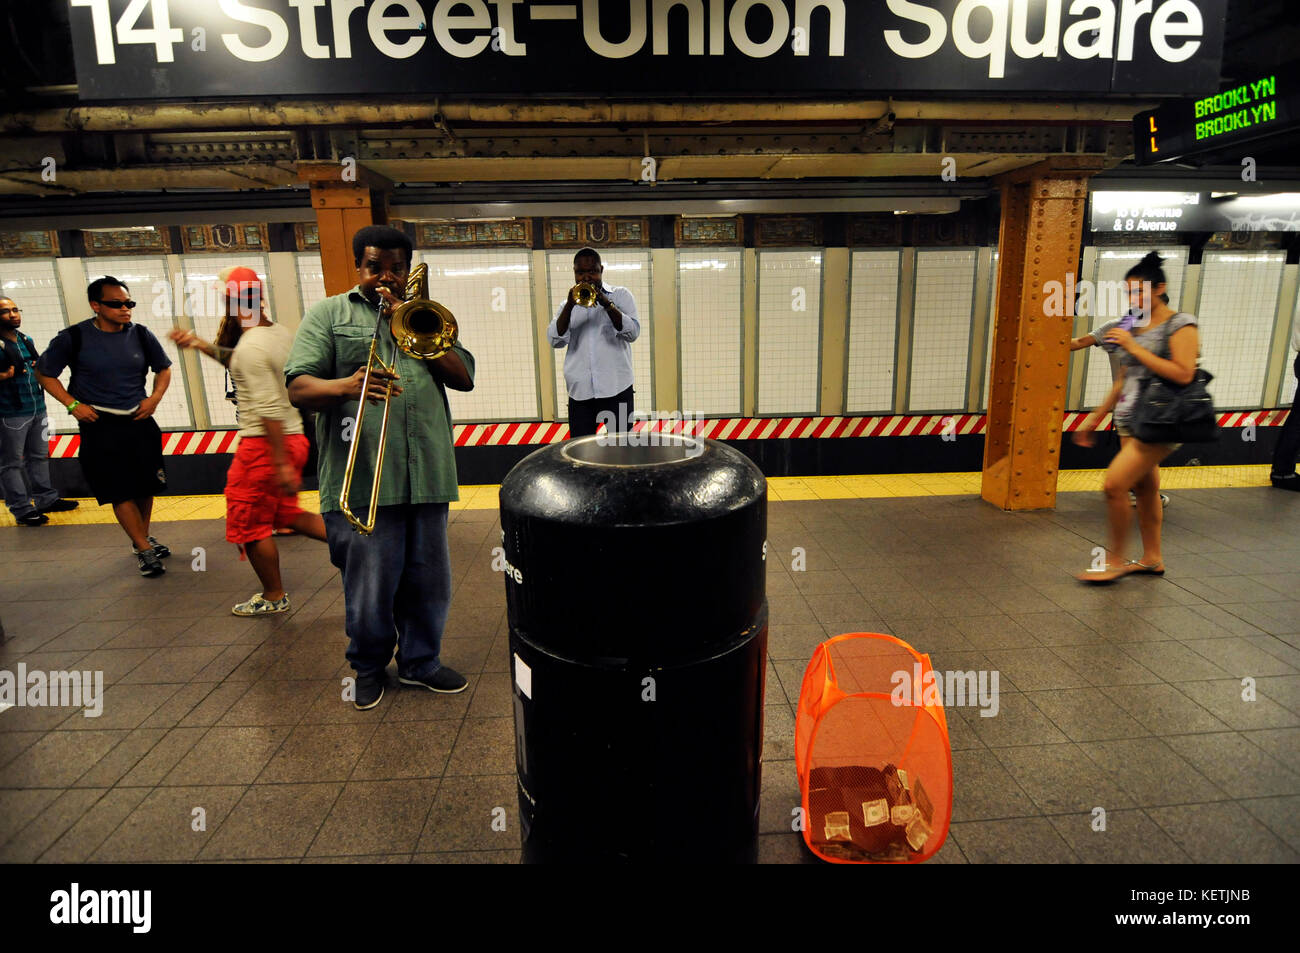 Musicians playing on the platform of Union Square subway station. Stock Photo